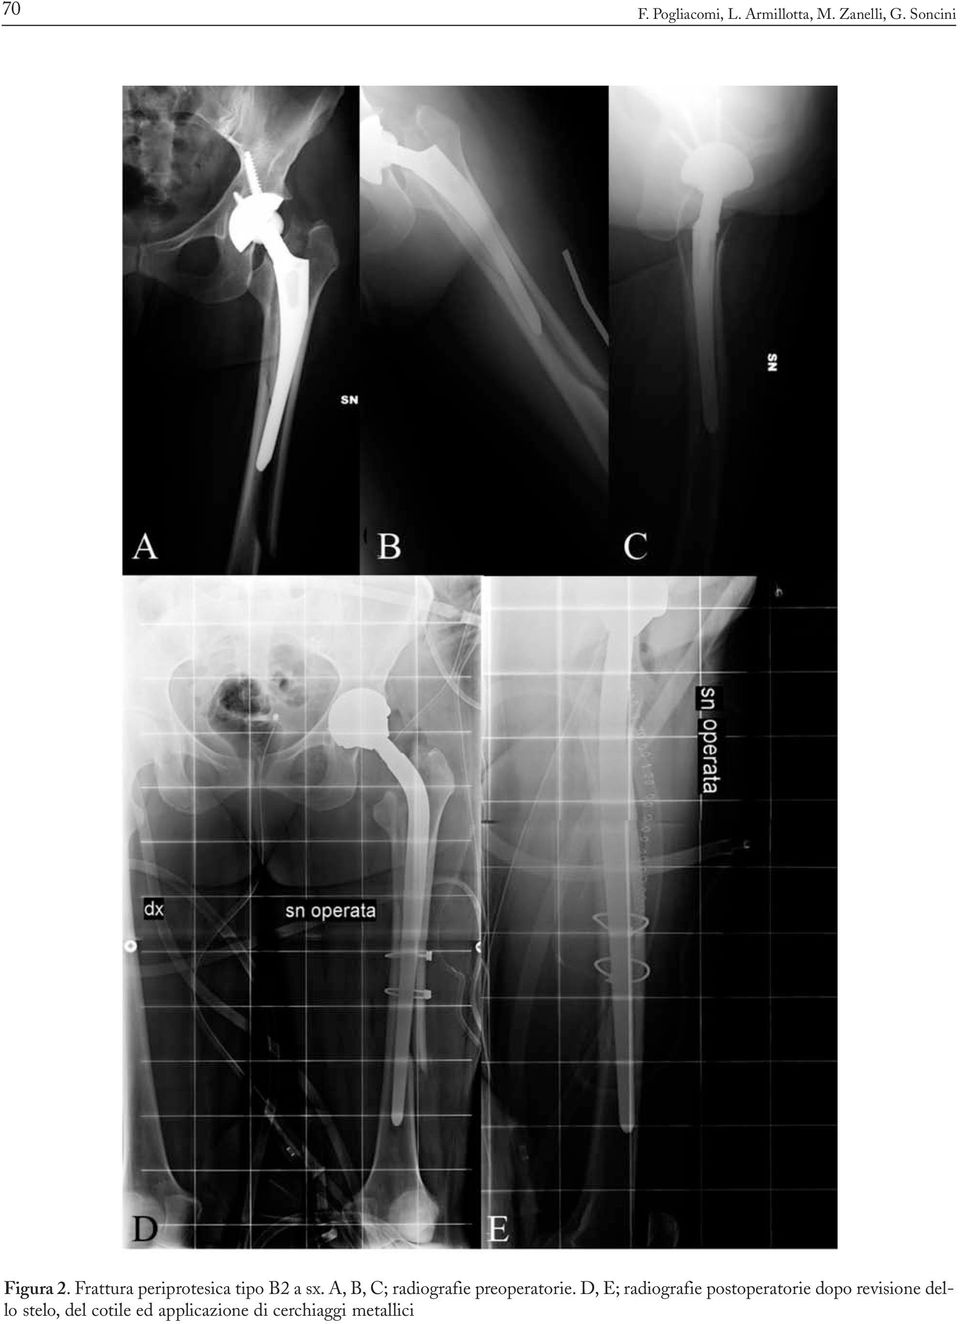 A, B, C; radiografie preoperatorie.